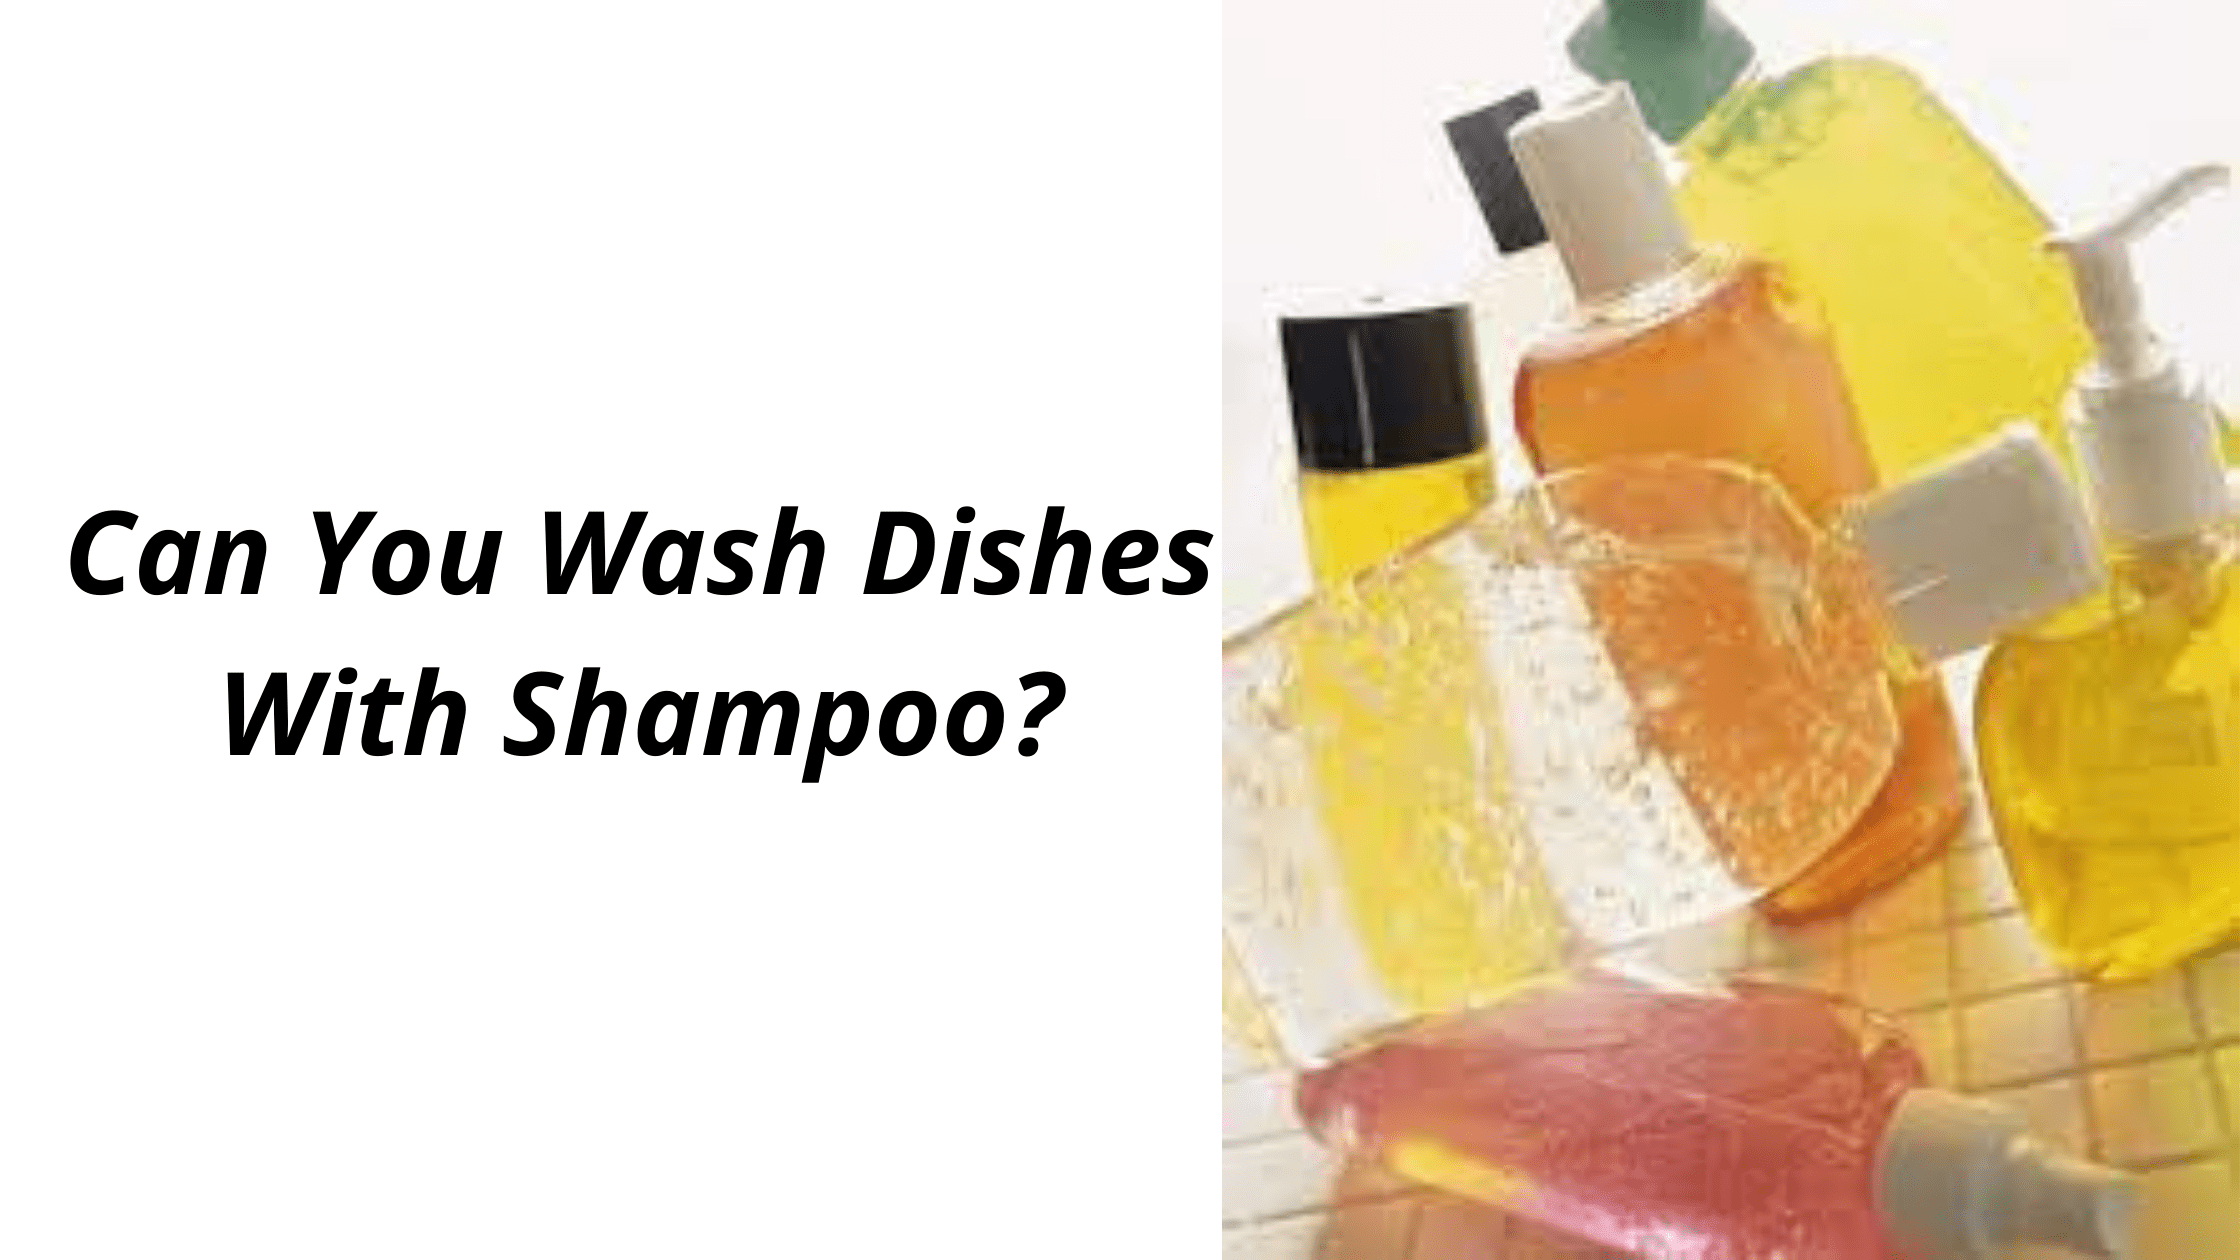 Can You Wash Dishes With Shampoo